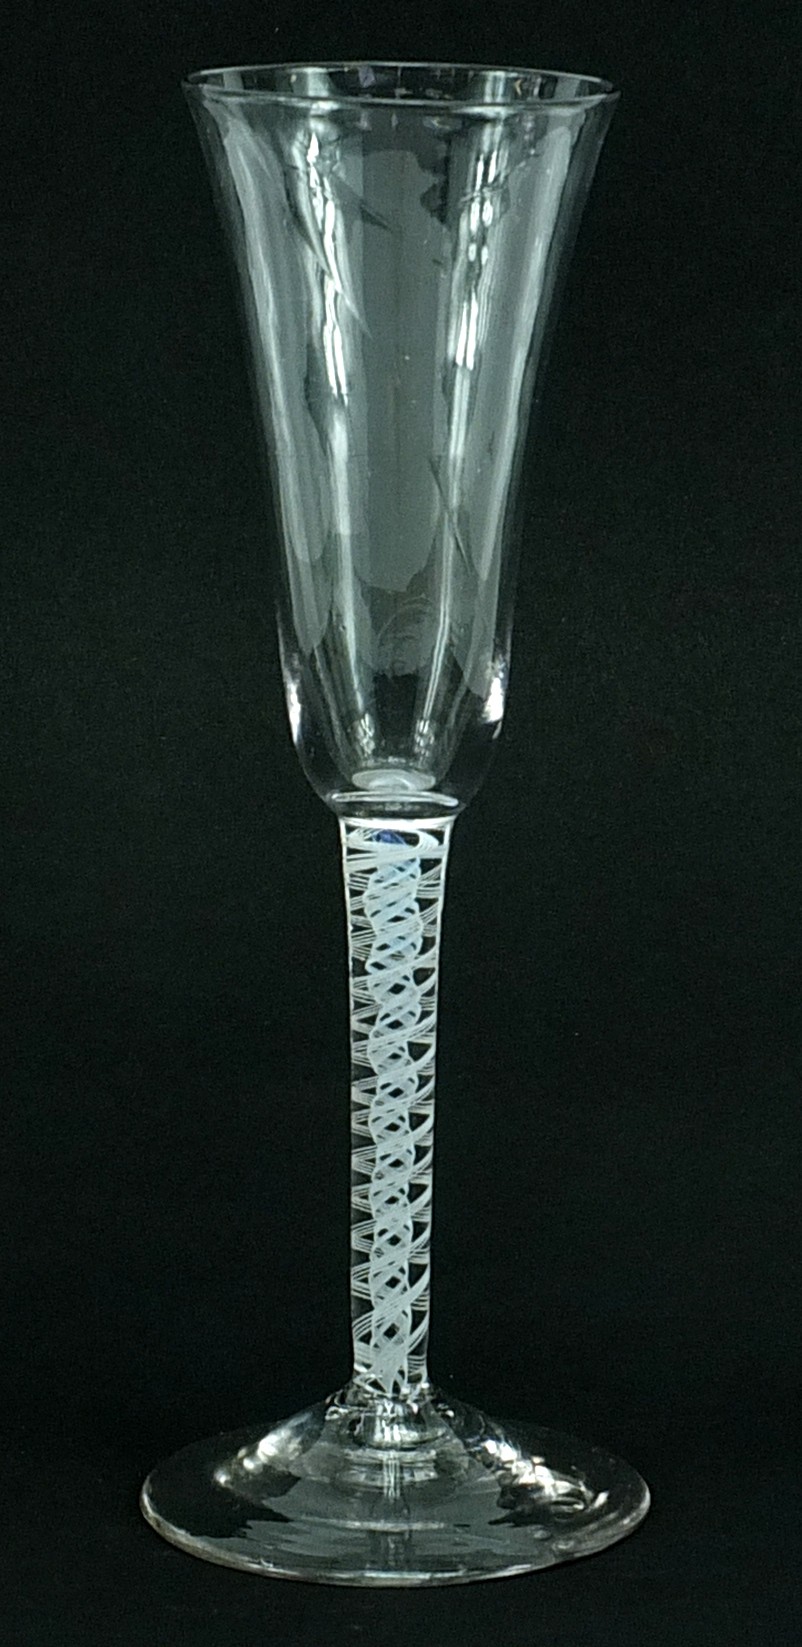 18th century wine glass with multiple opaque twist stem, 19cm high